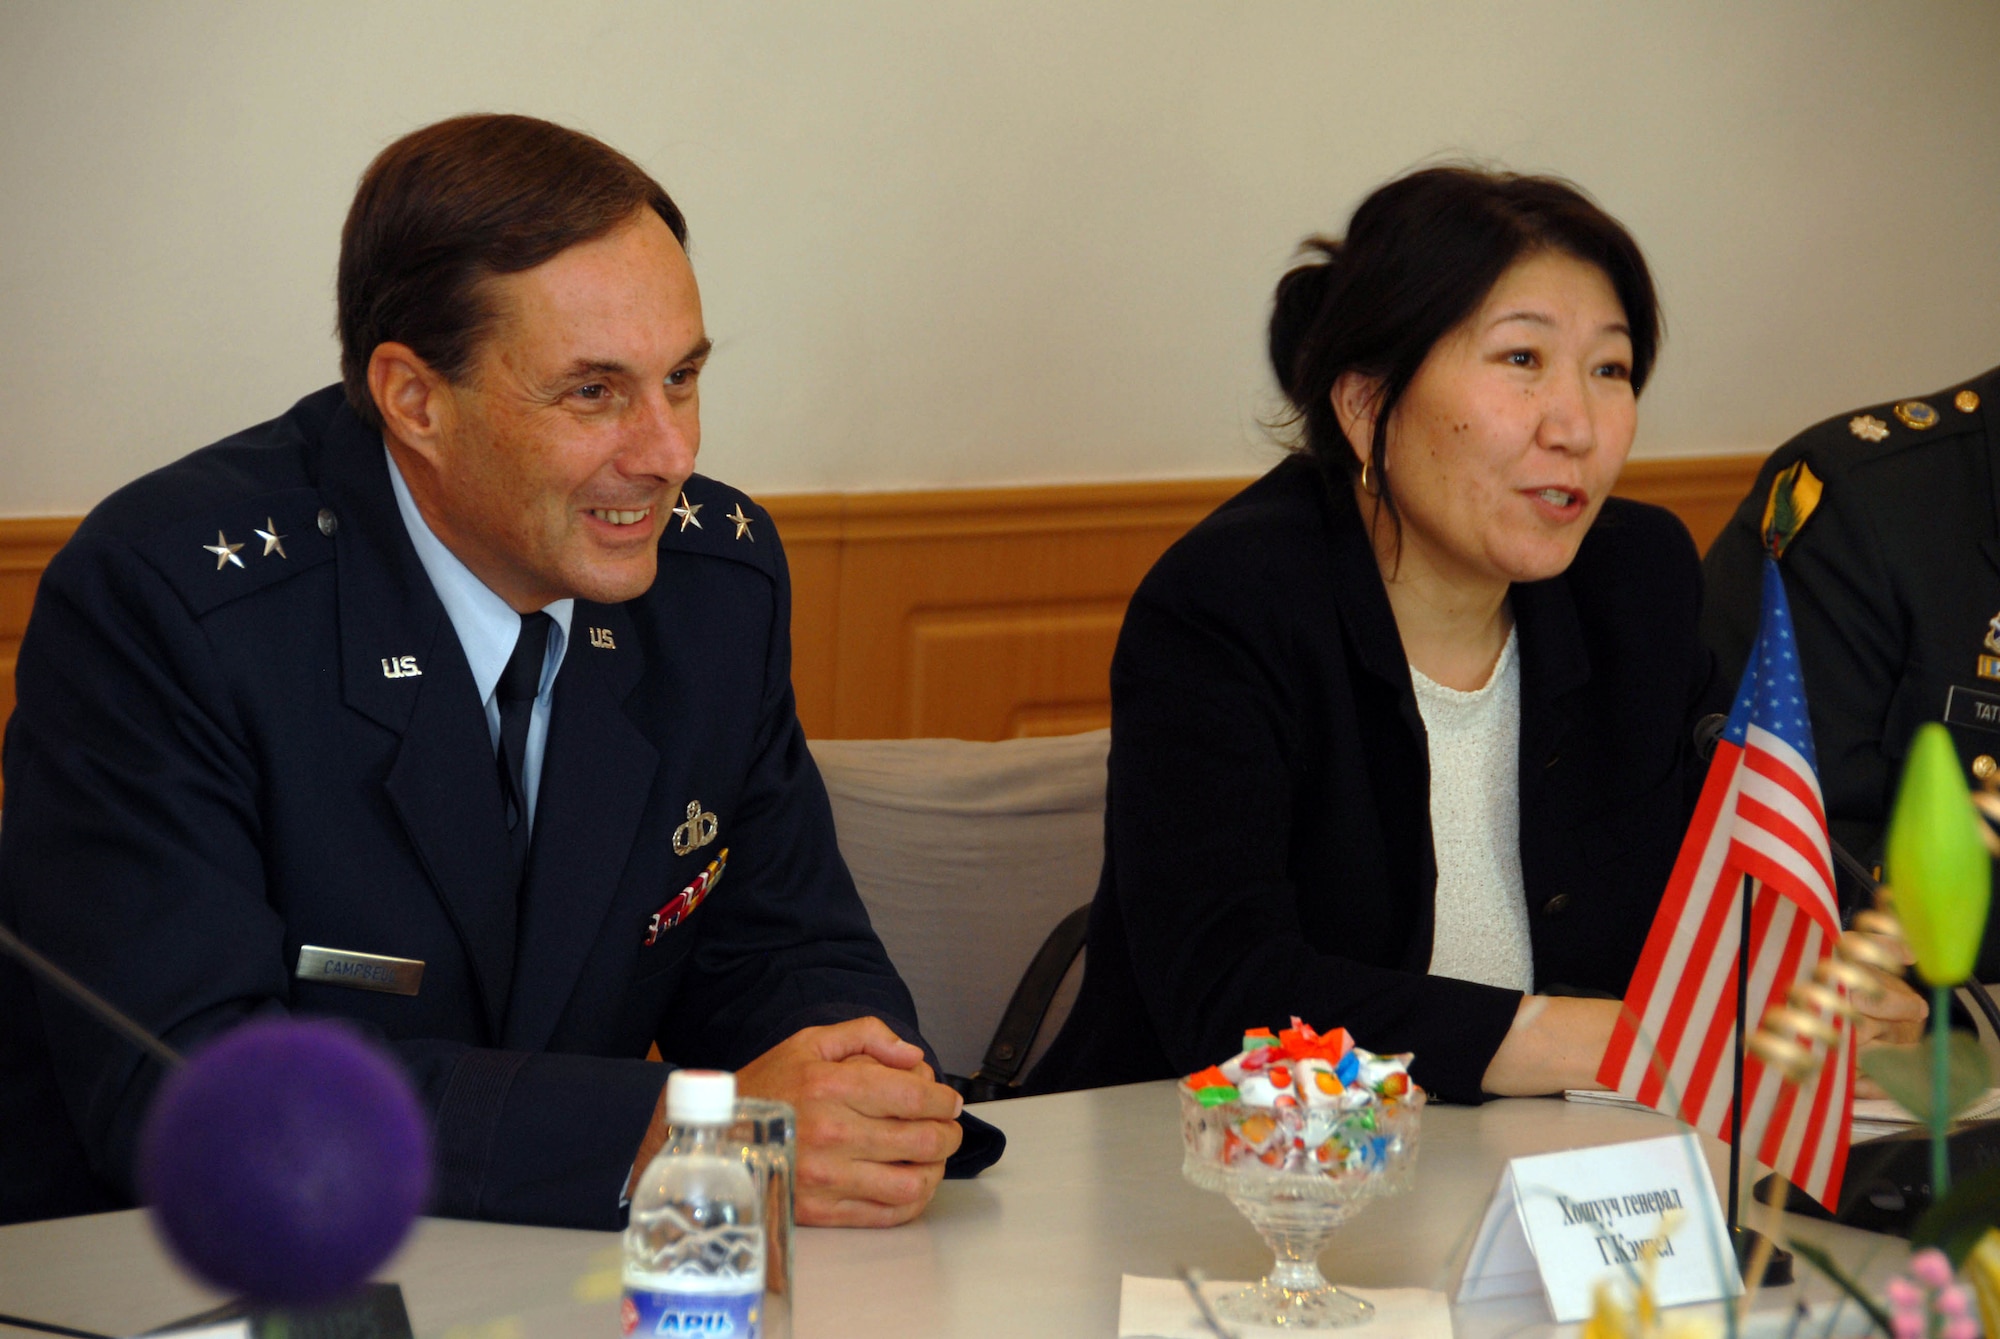 Lt. Gen. Craig Campbell, the adjutant general of the Alaska National Guard, waits as his translator, Mrs. Tsedka, conveys his words to Mongolia Armed Forces (MAF) Chief of General Staff Lt.Gen. Togoo, with his translator and staff. Alaska Air National Guard photo by Master Sgt. Jules Barklow.
